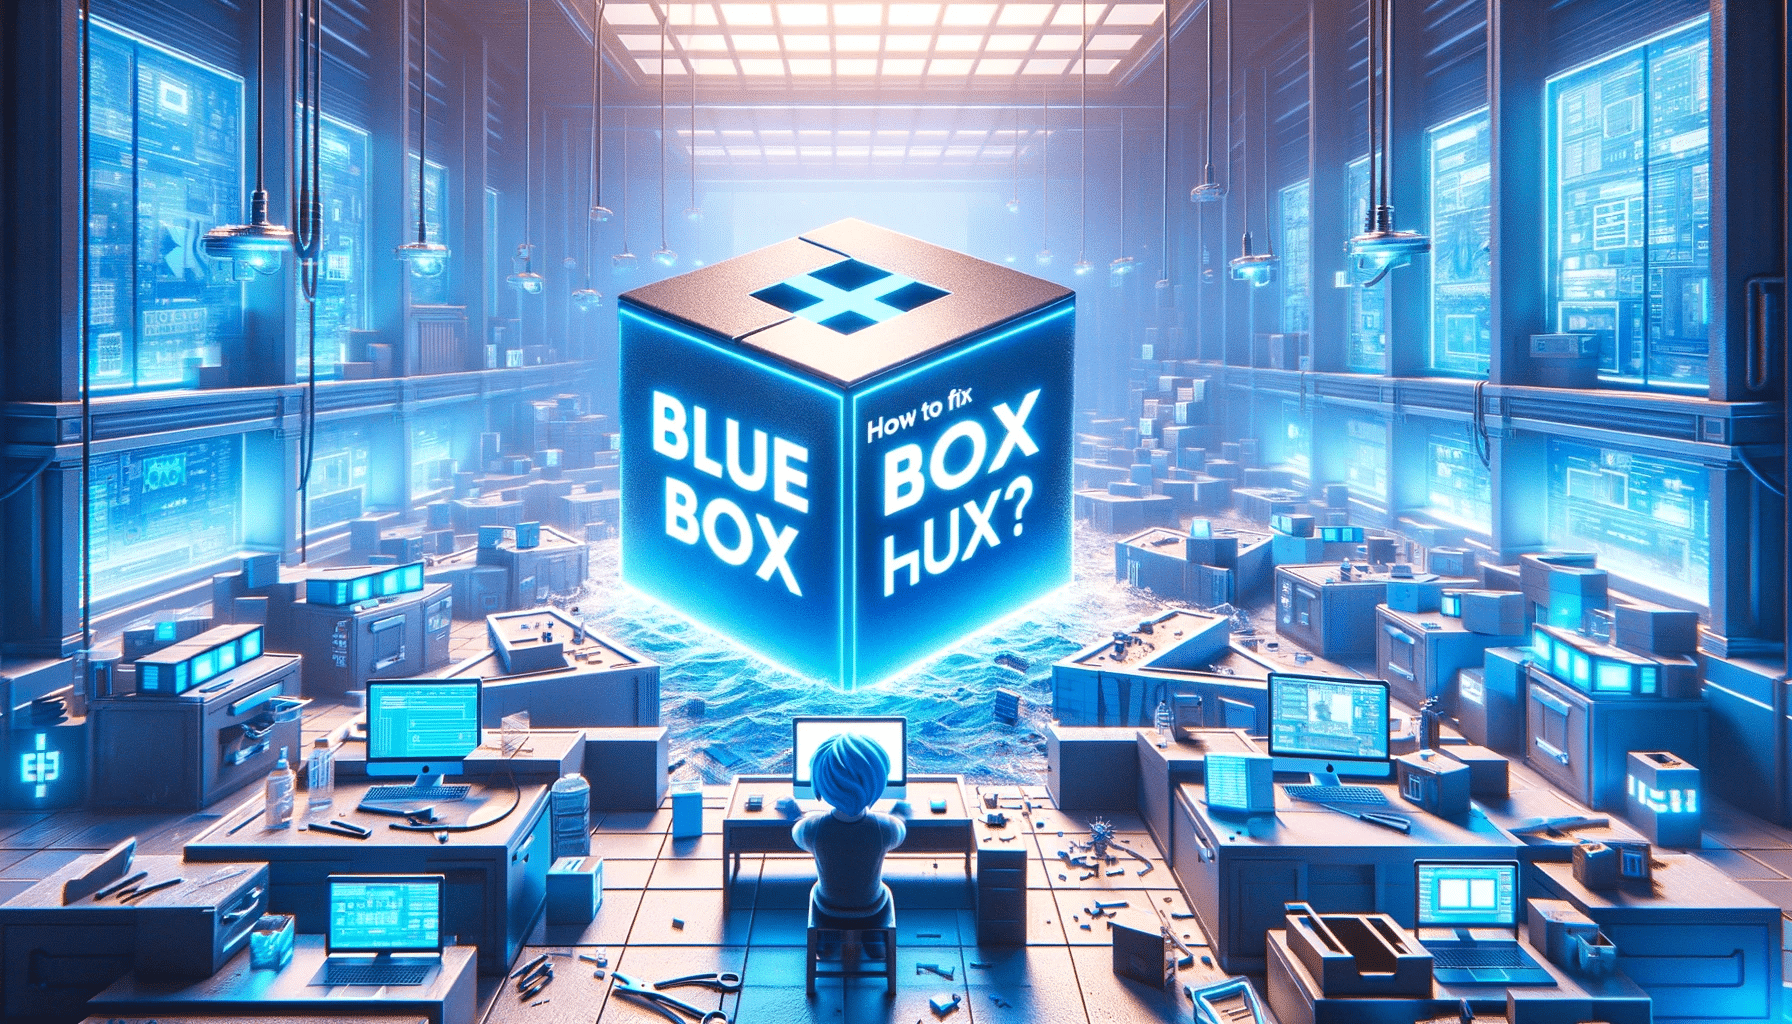 DALL·E 2023 11 28 17.06.58 Create a hyper realistic image in 8k resolution for a blog post titled How to Fix the blue box glitch in Roblox . The image should visually represen